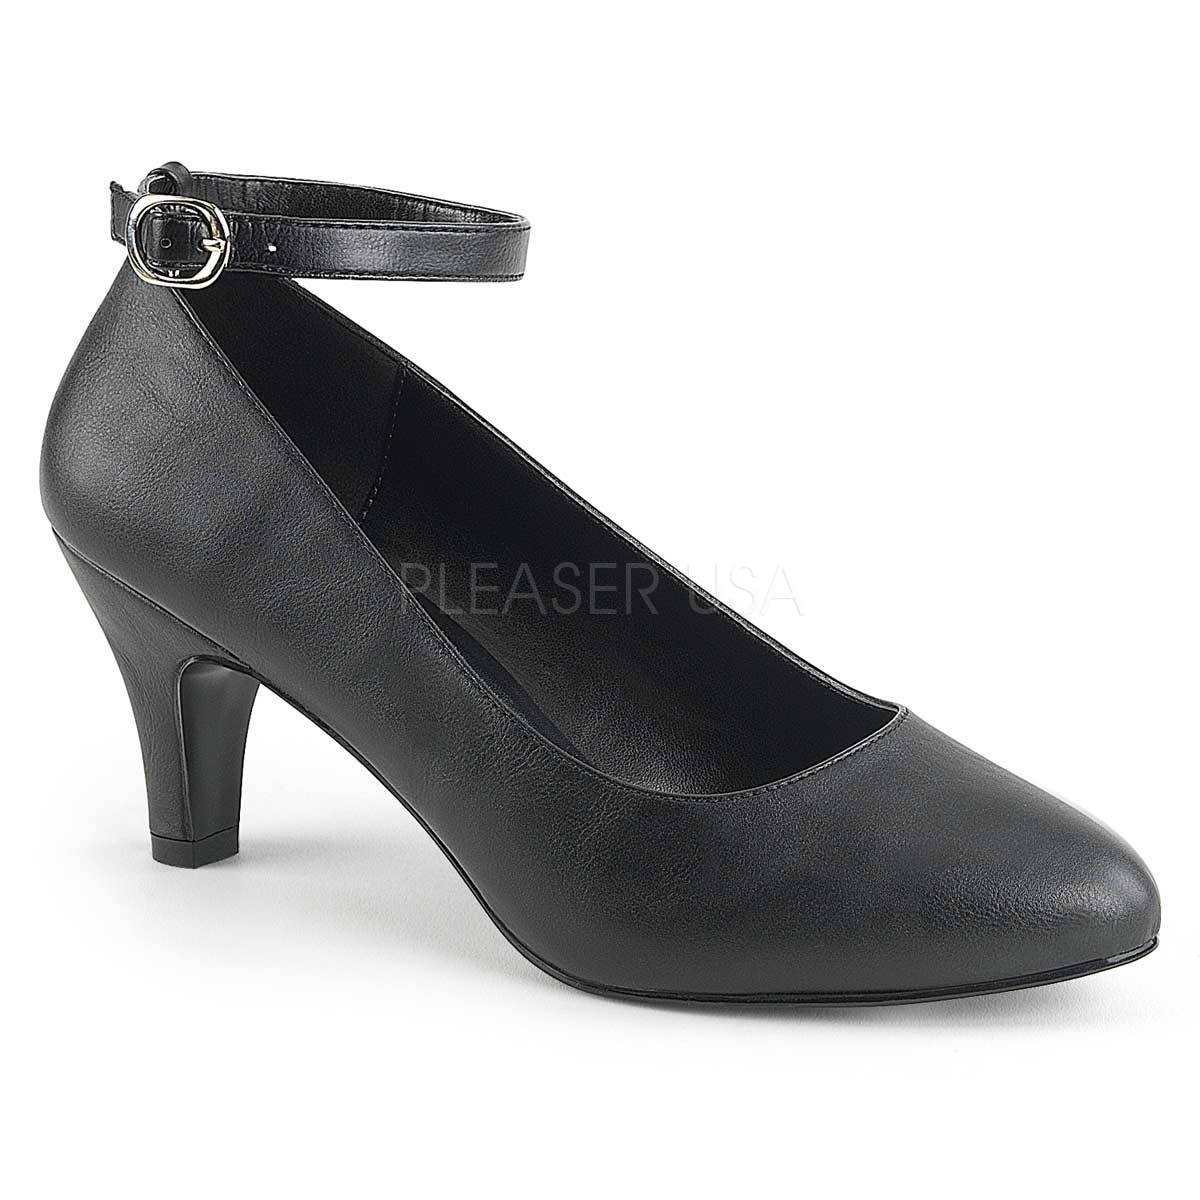 Pleaser Divine-431 - Black Faux Leather in Sexy Heels & Platforms - $43.99